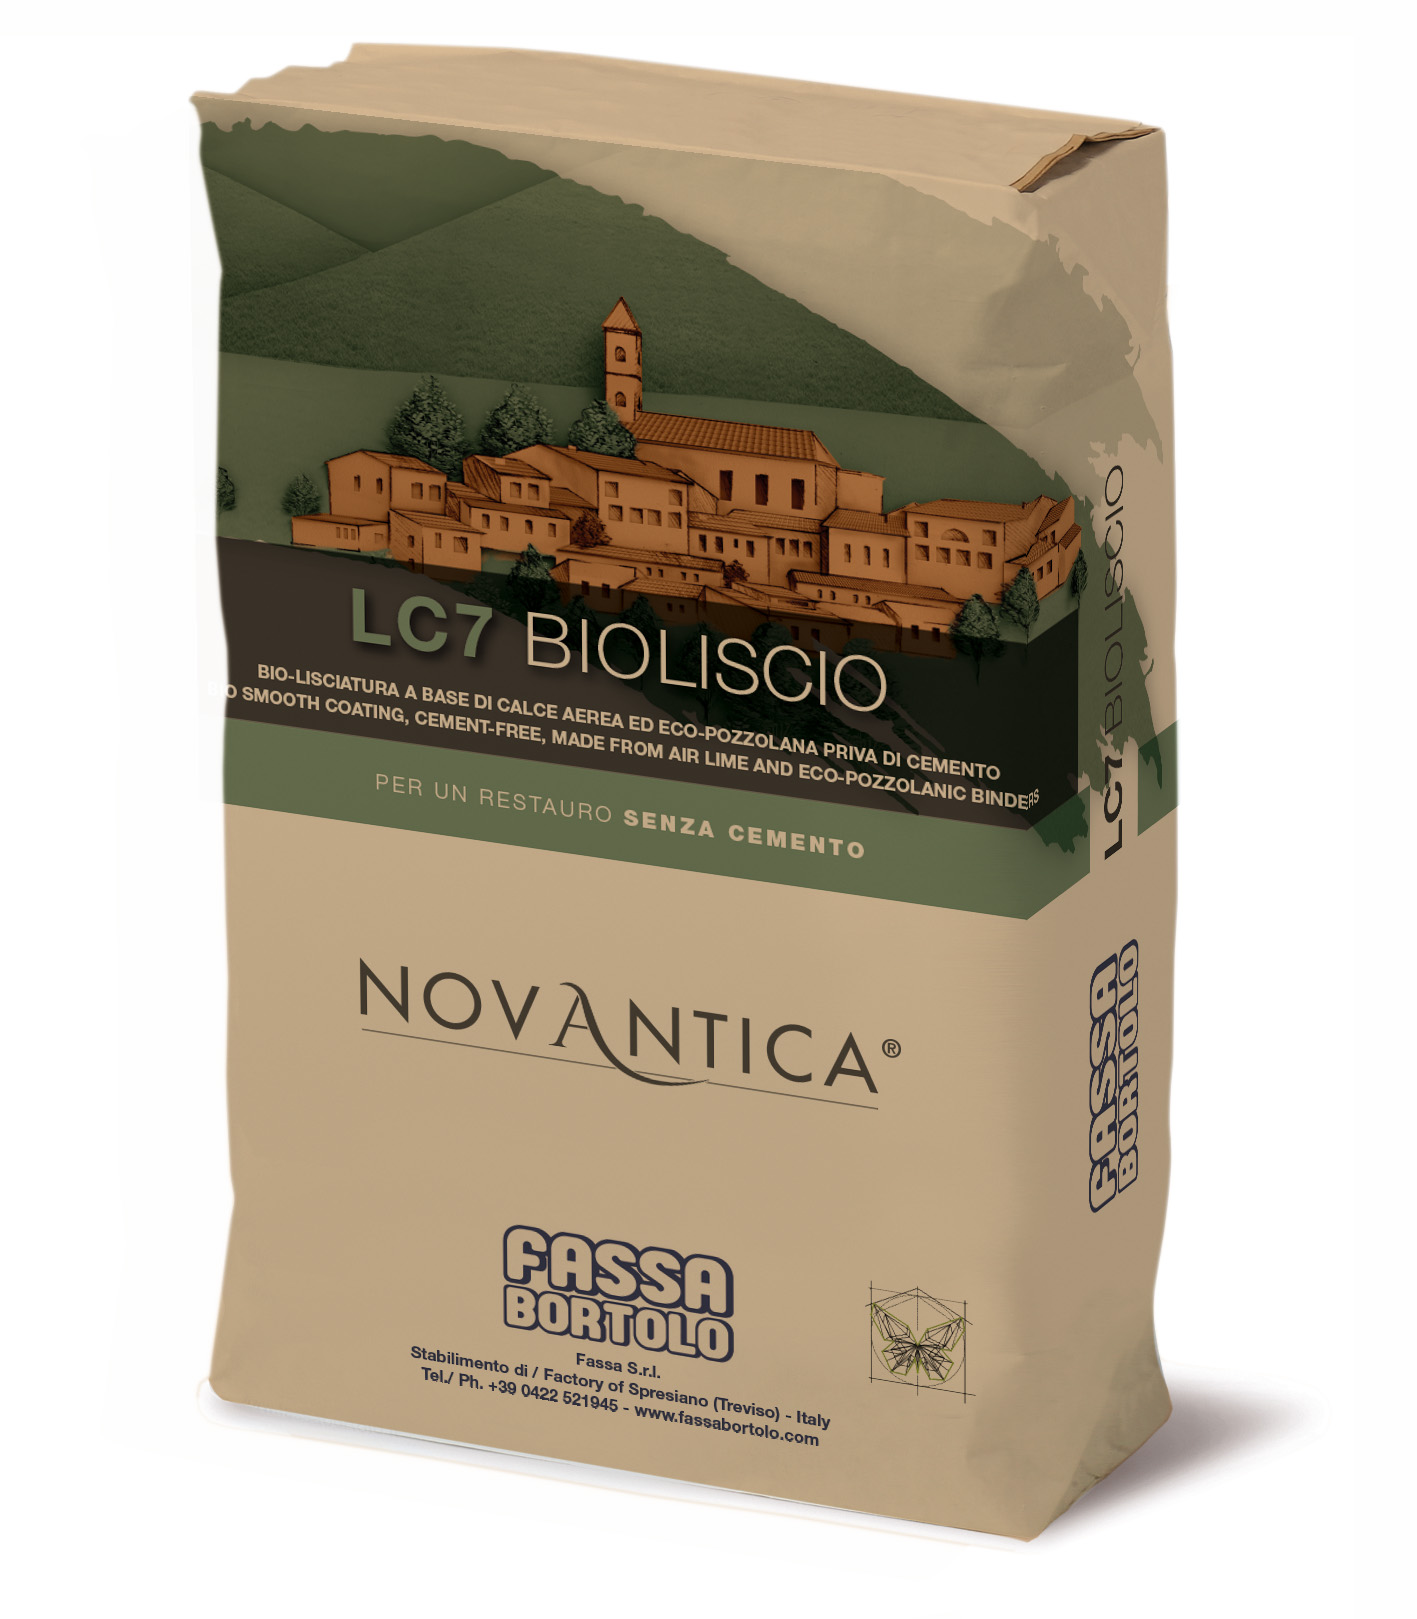 LC7 BIOLISCIO: Smooth finish coat plaster, cement-free, made from lime and pozzolanic binders